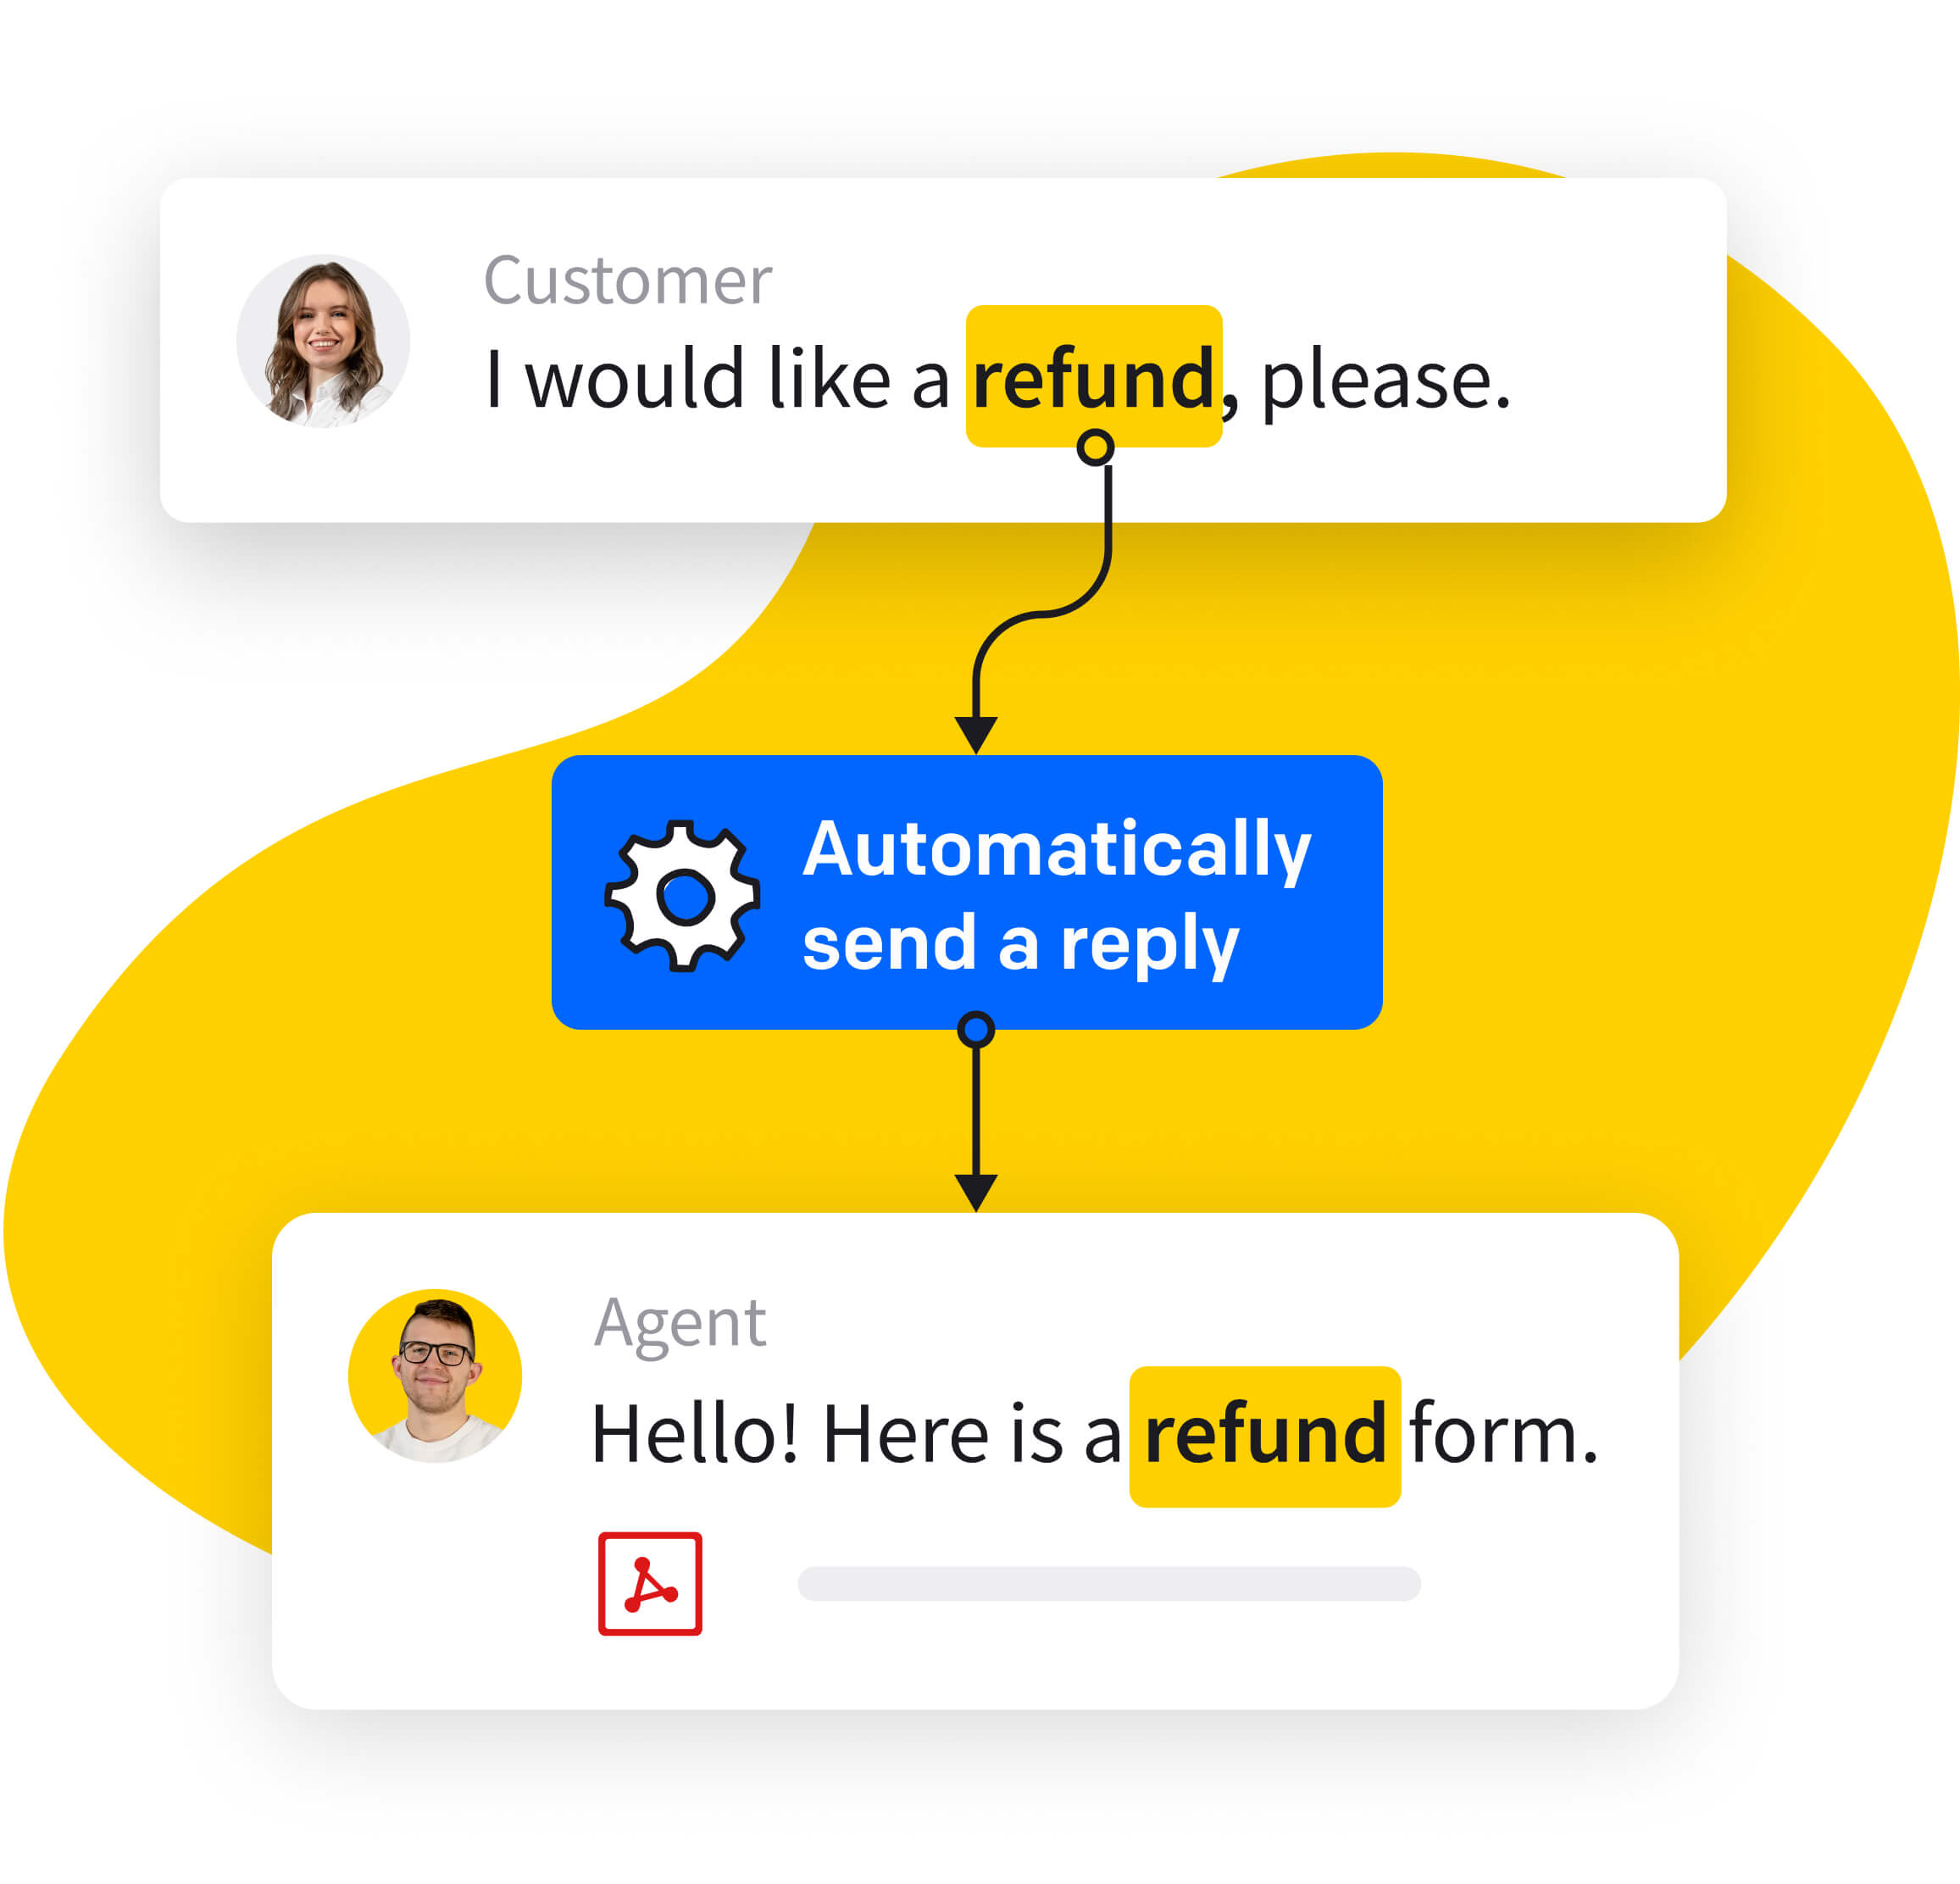 Message from the customer with a refund request, followed by an automatic reply with the refund form